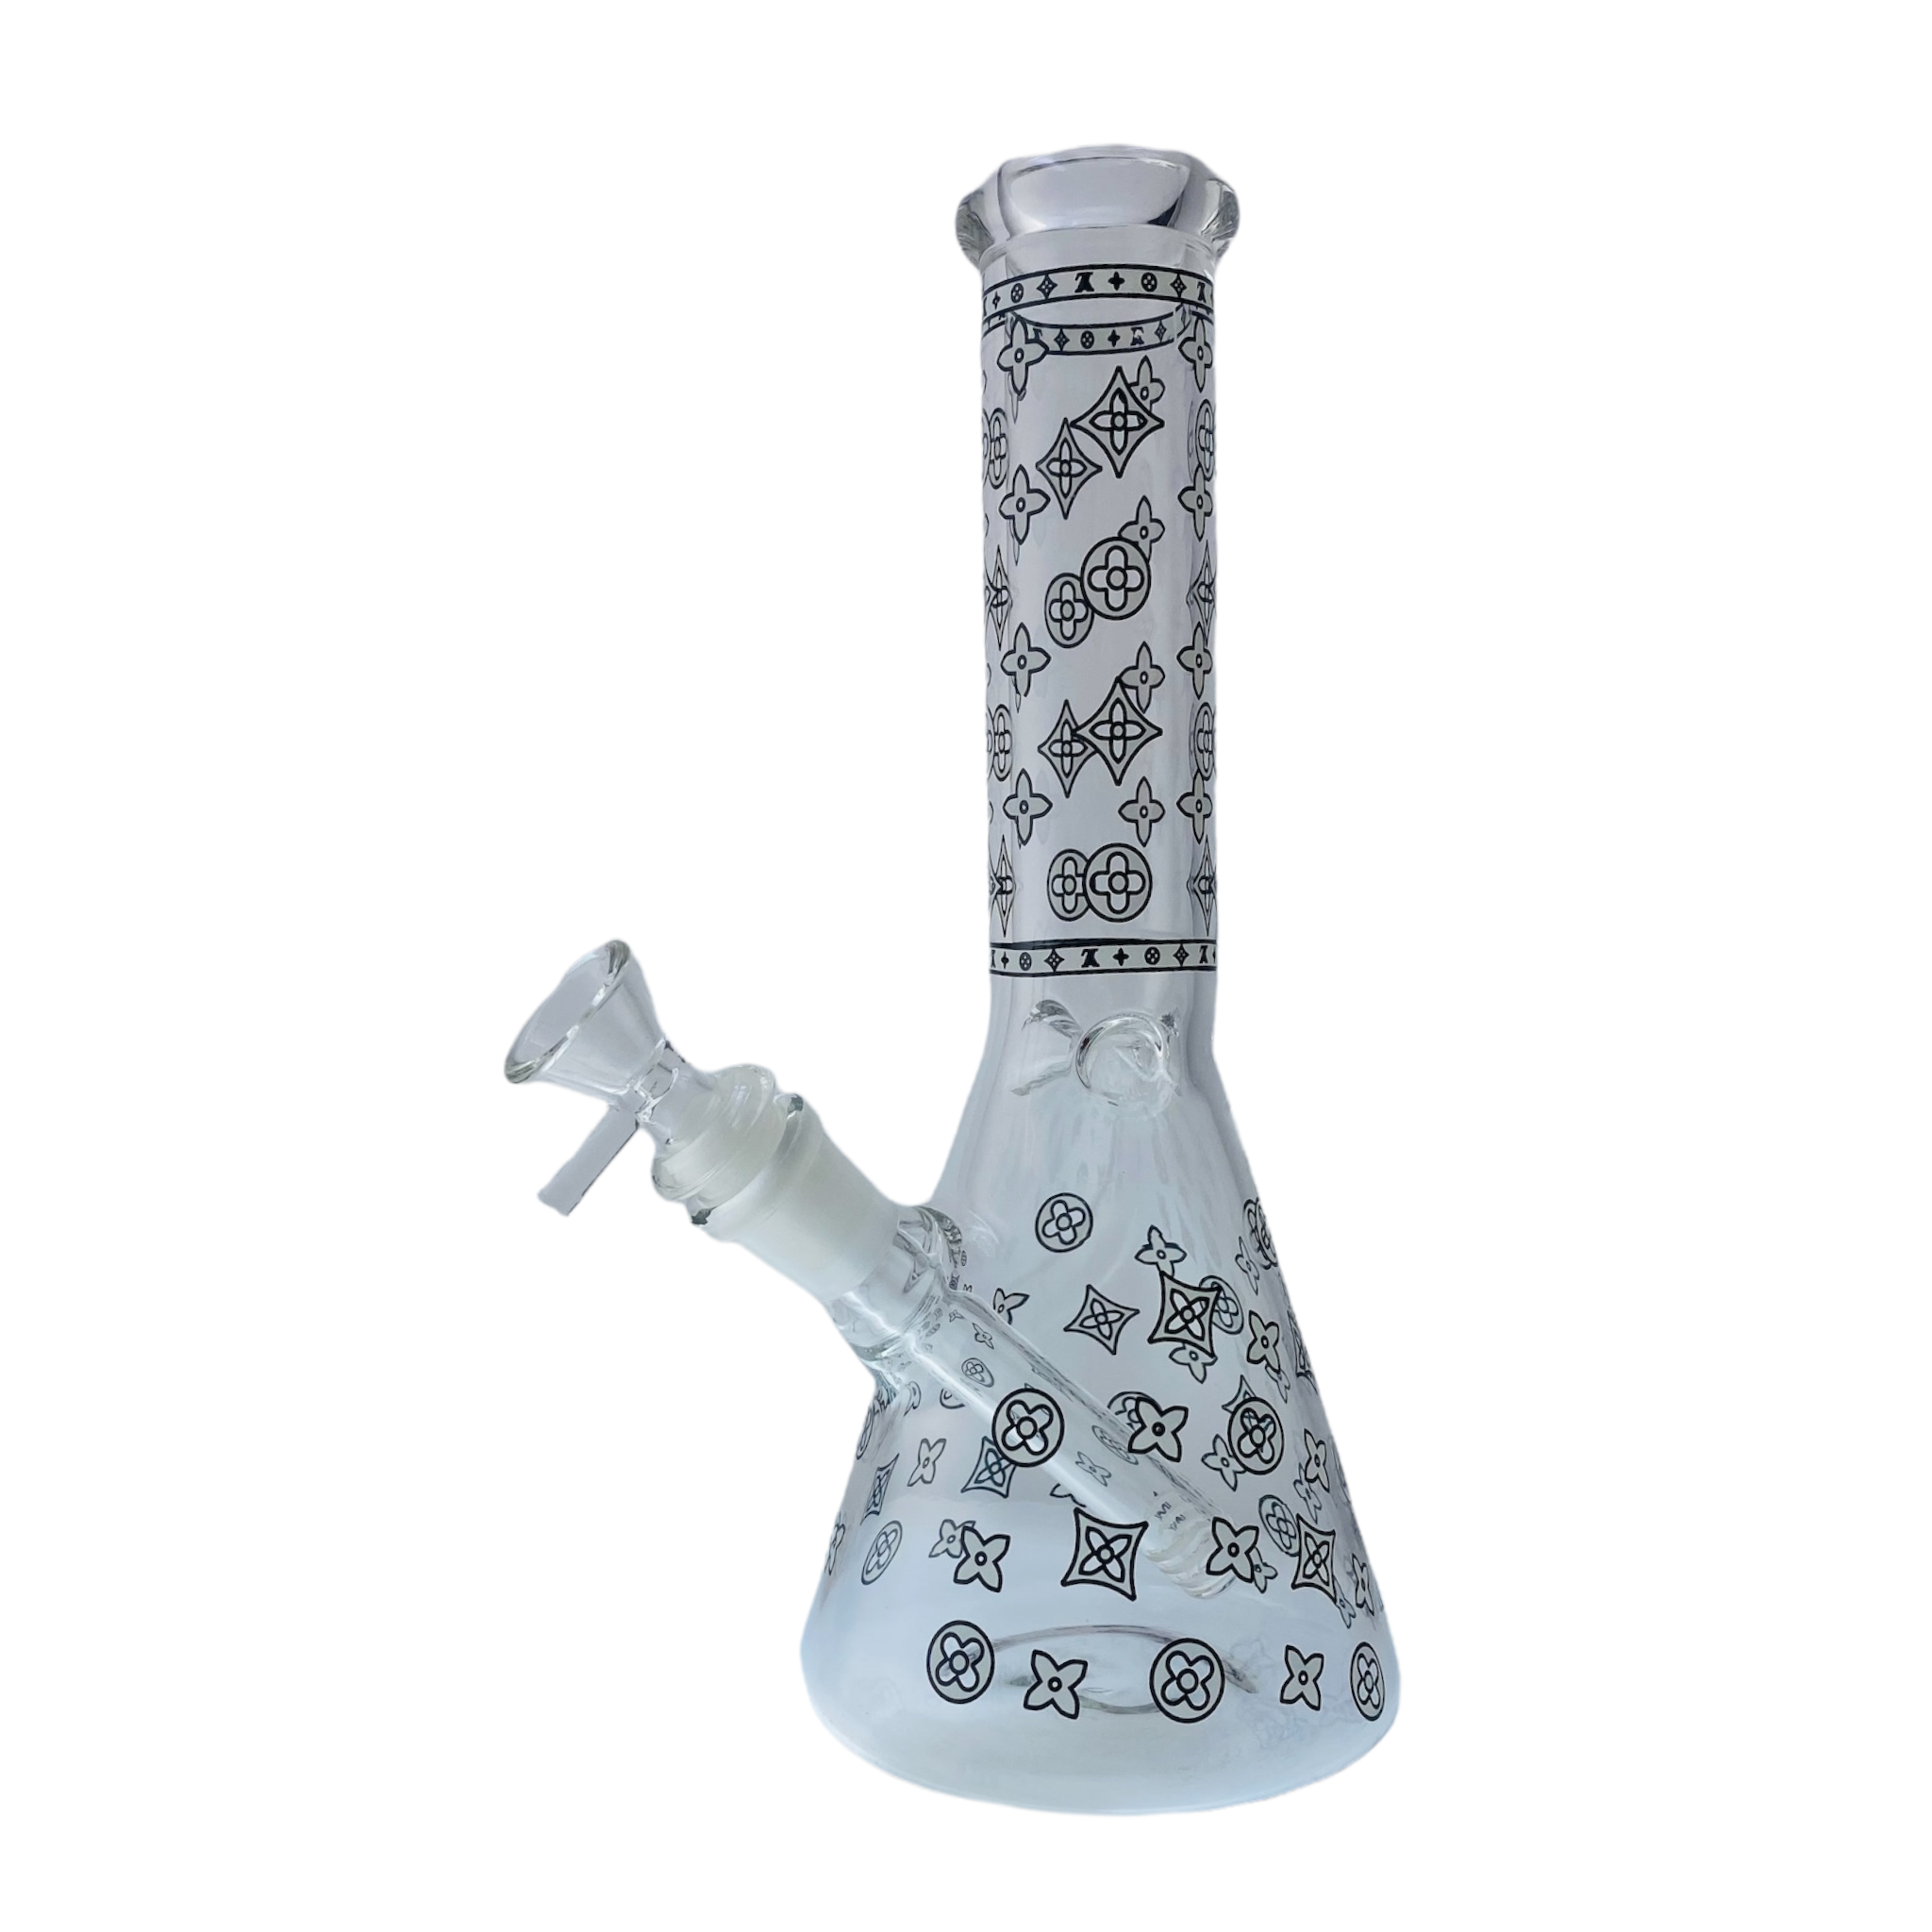 clear Beaker Bong Water Pipe With Decorative Symbols